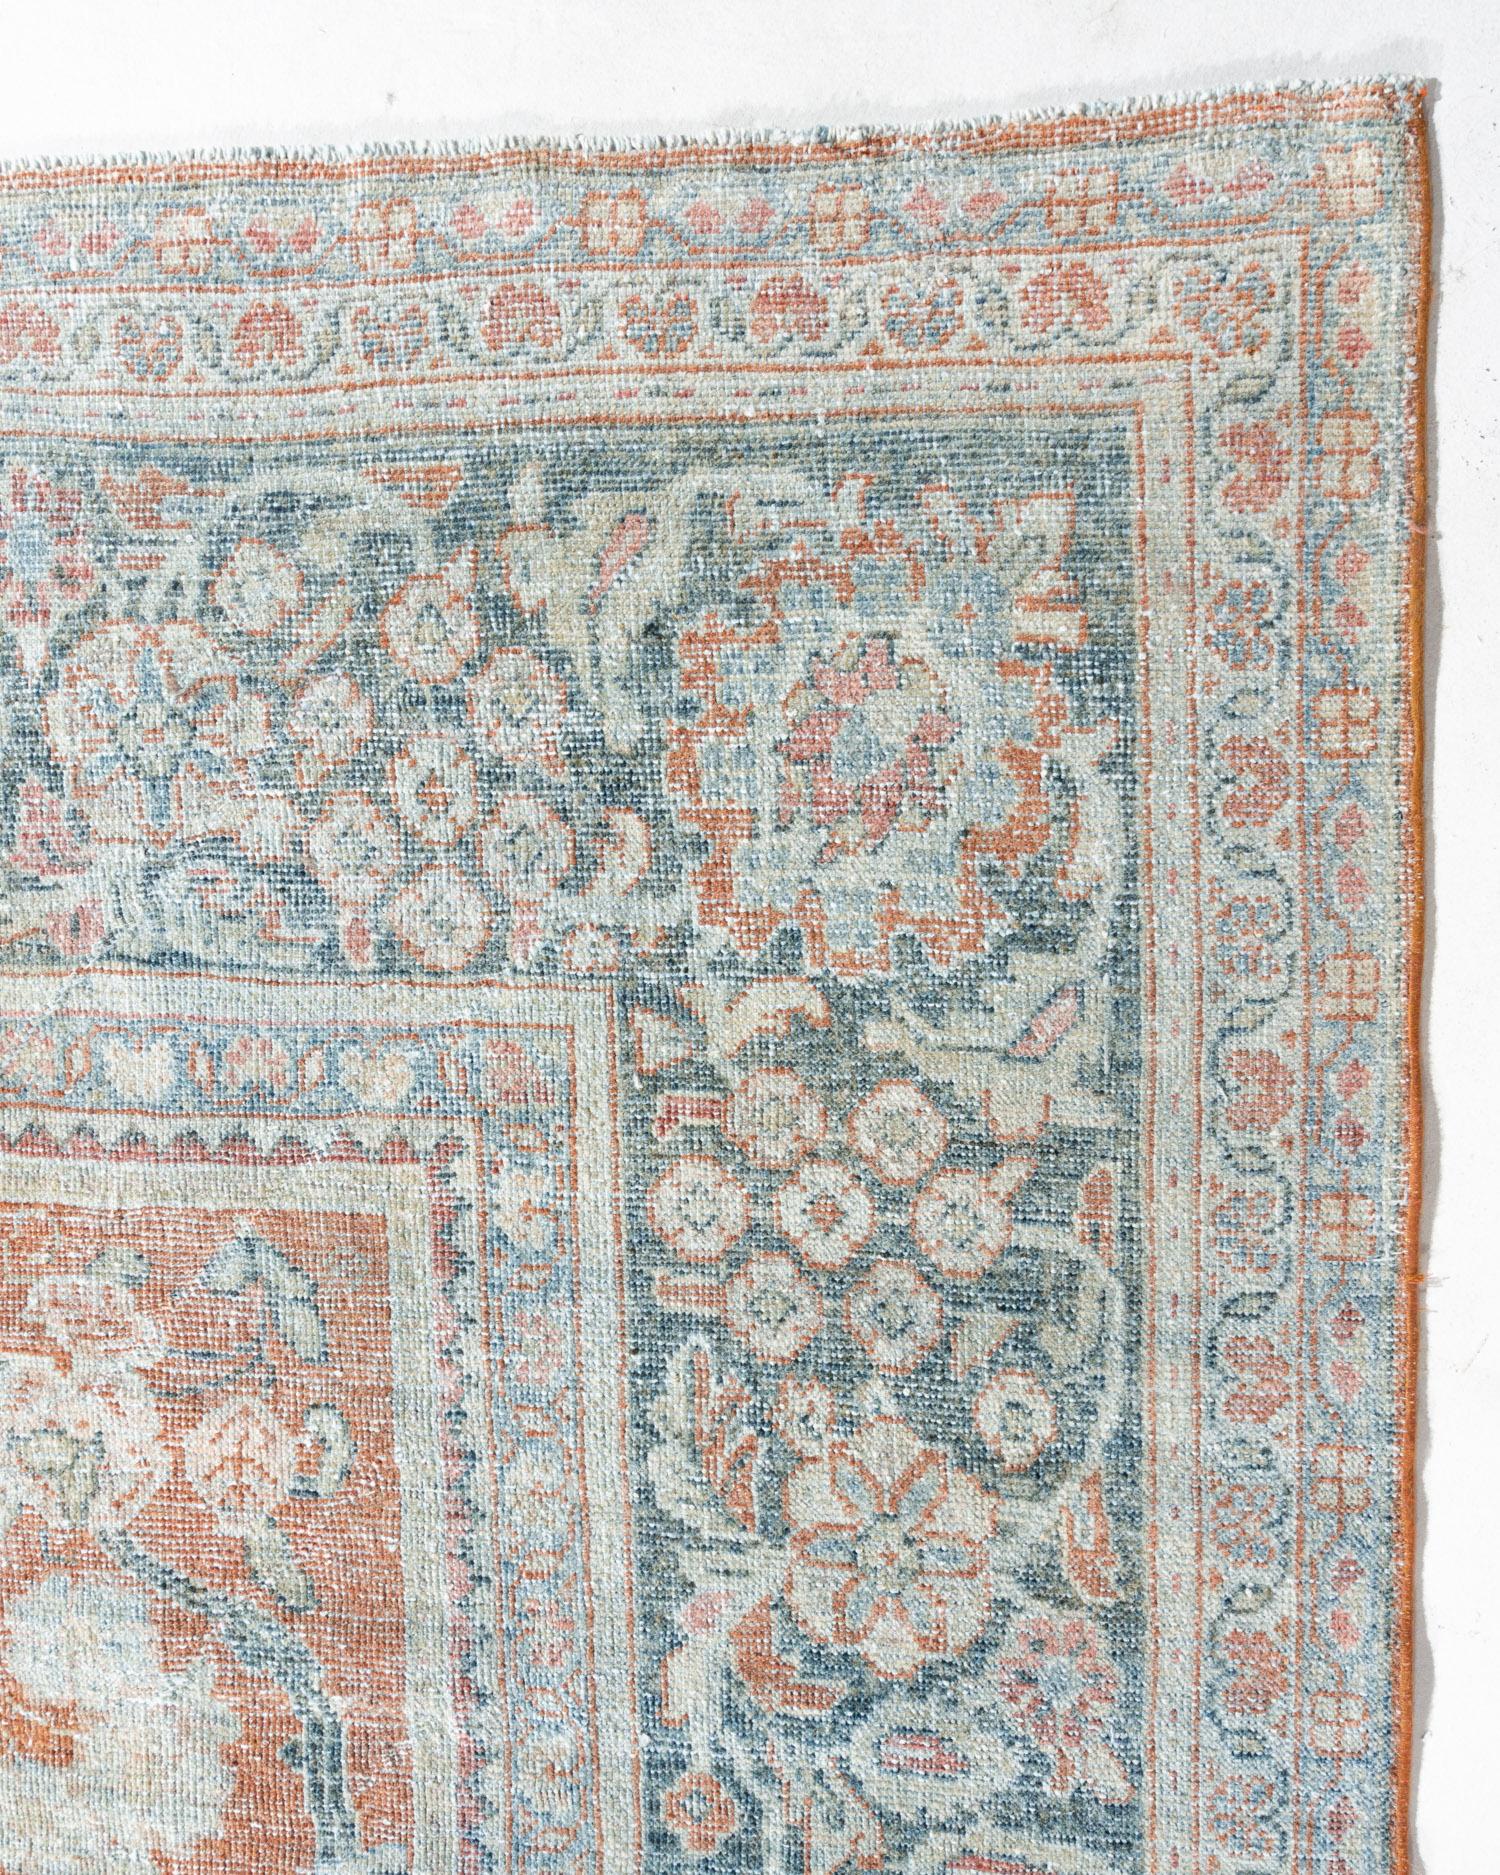 Antique Faded Brick Red Persian Distressed Sultanabad Rug  11'6 x 18'1 In Good Condition For Sale In New York, NY